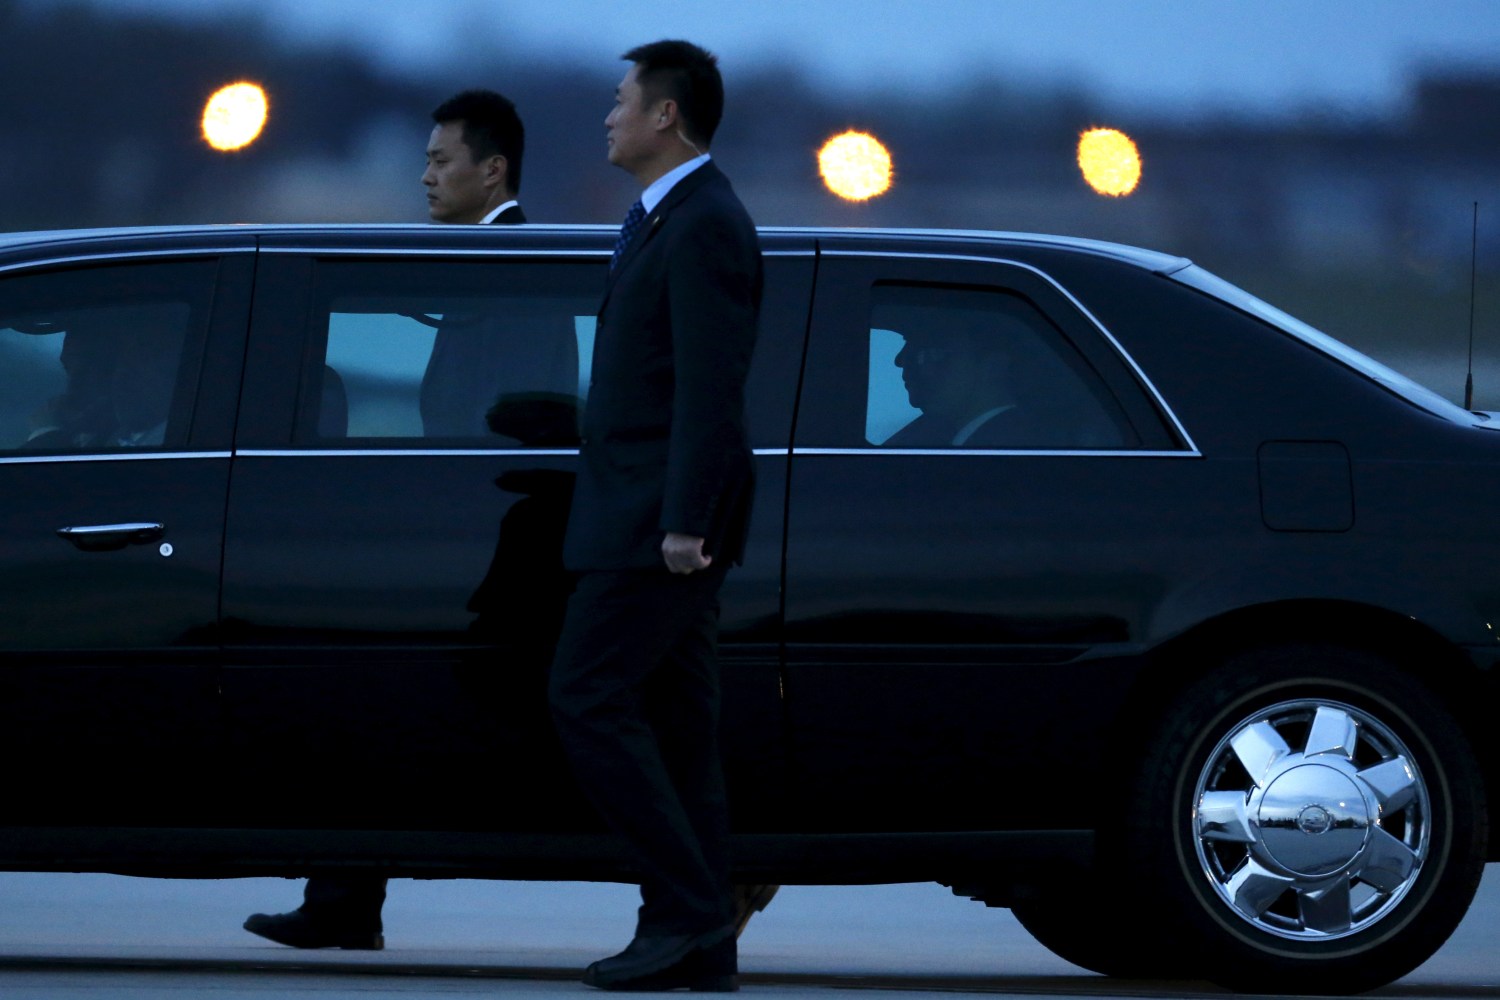 Security agents walk alongside Chinese President Xi Jinping's (silhouetted, 2nd R in window) car as he arrives to attend the upcoming Nuclear Security Summit meetings in Washington, on the tarmac at Joint Base Andrews, Maryland March 30, 2016. REUTERS/Jonathan Ernst TPX IMAGES OF THE DAY - RTSCX2F